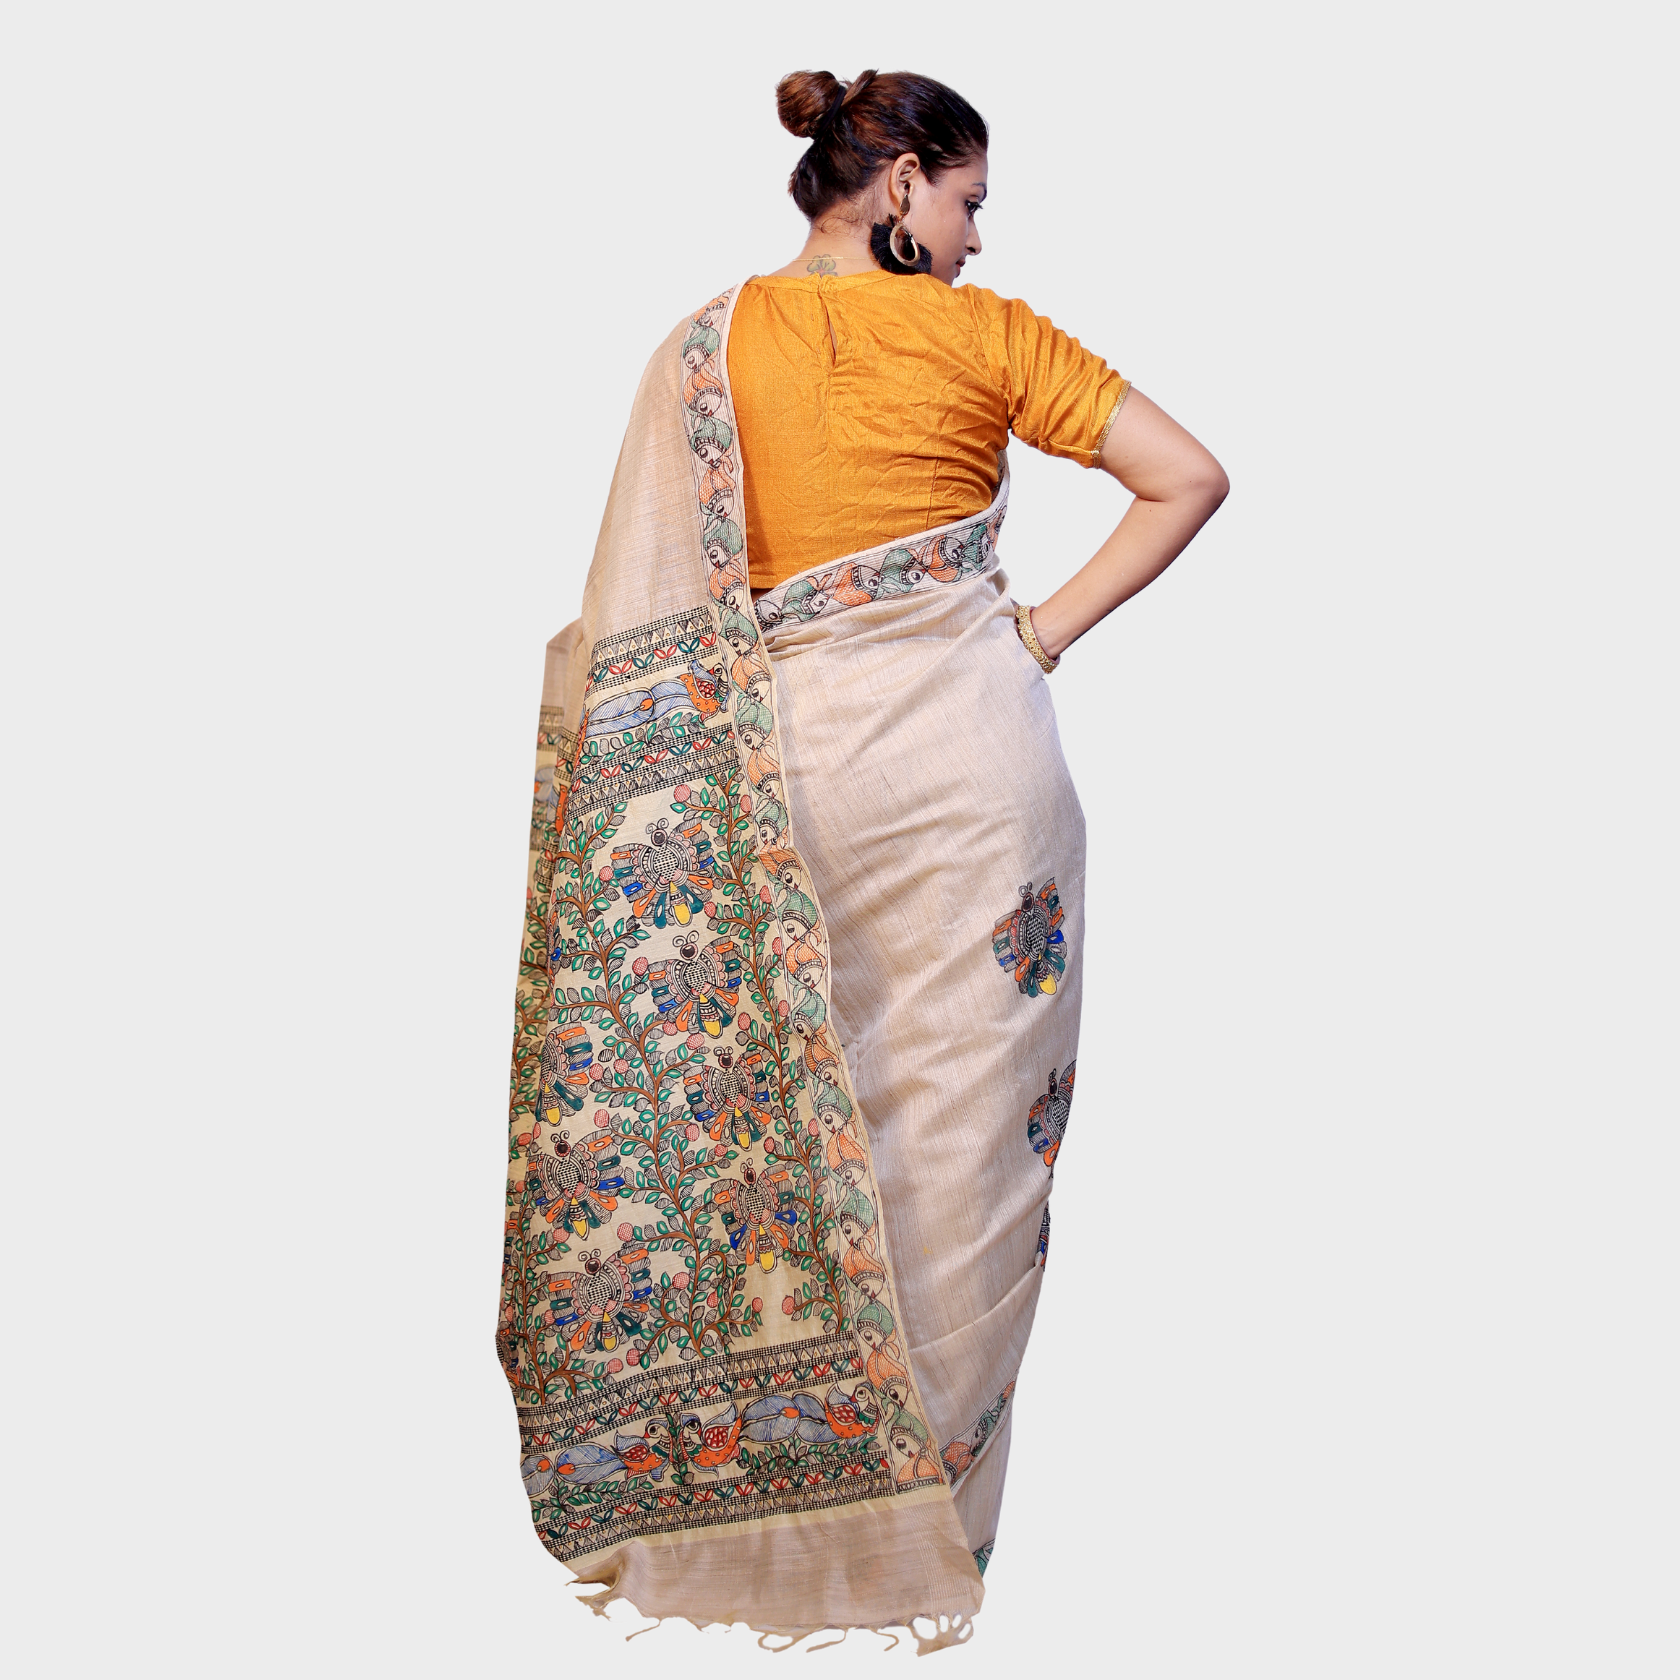 Hand Painted Madhubani Saree with Fascinated Butterfly Design